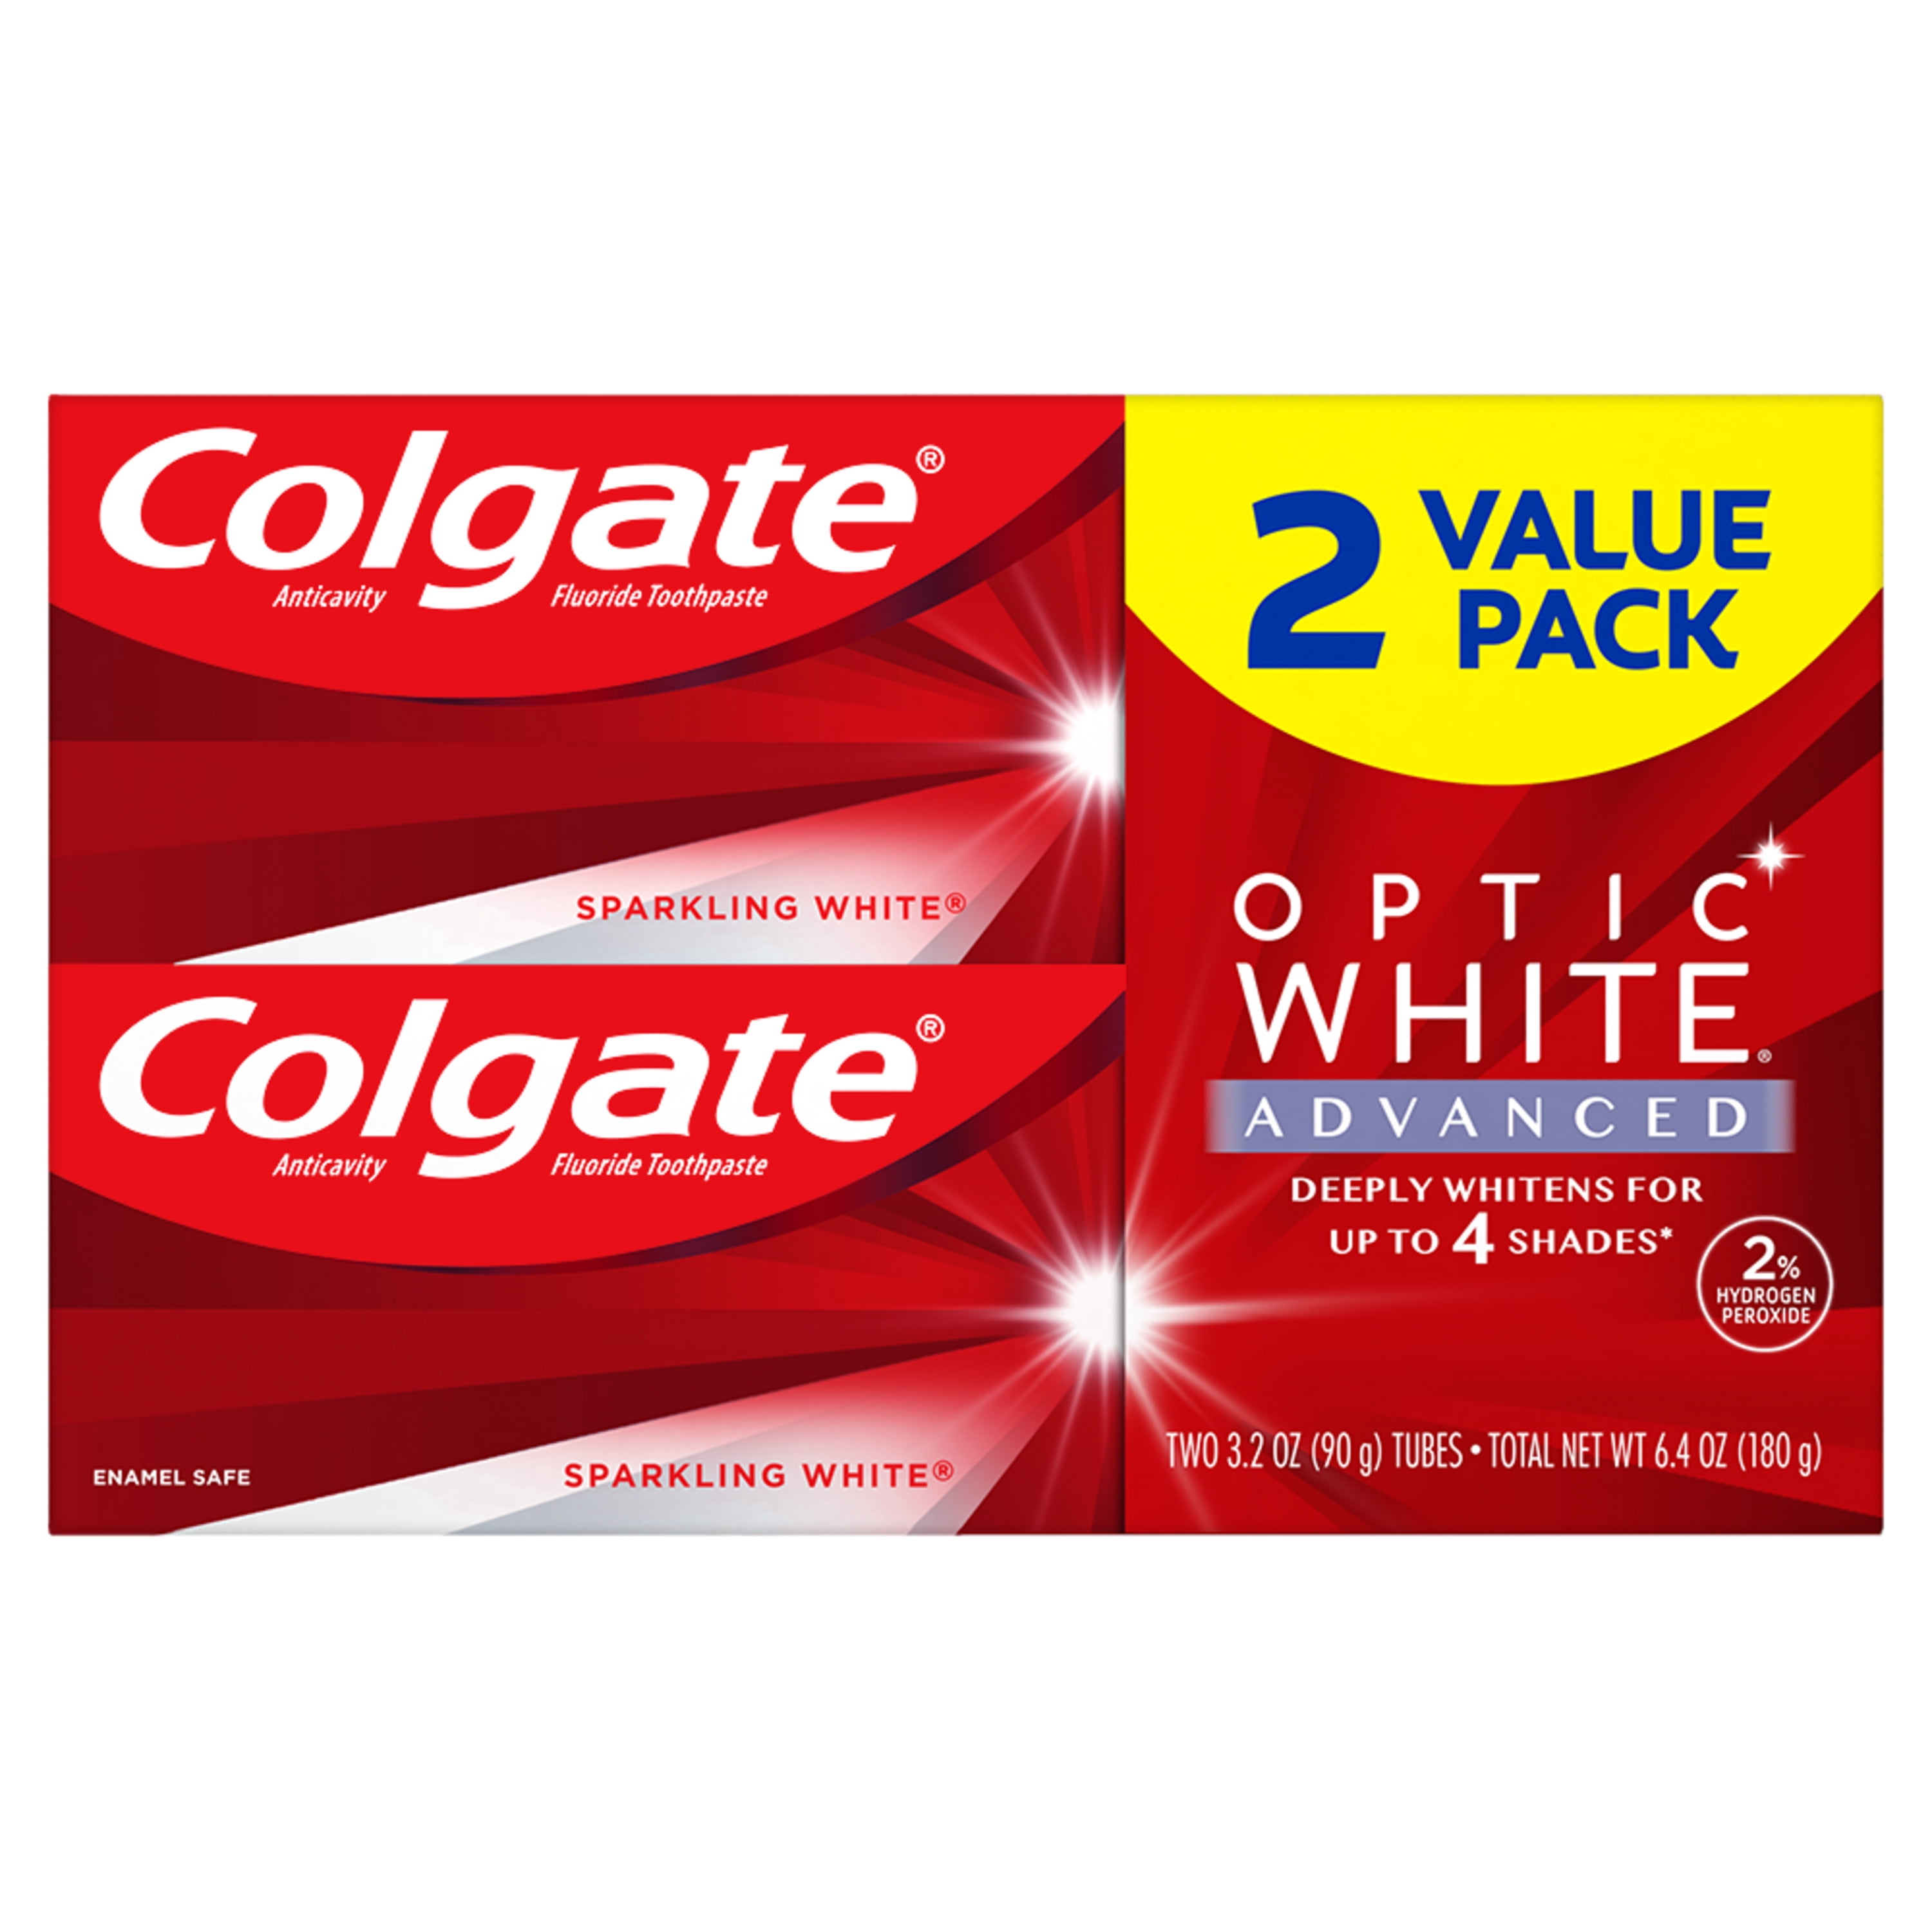 Colgate® Optic White® with Charcoal Toothpaste